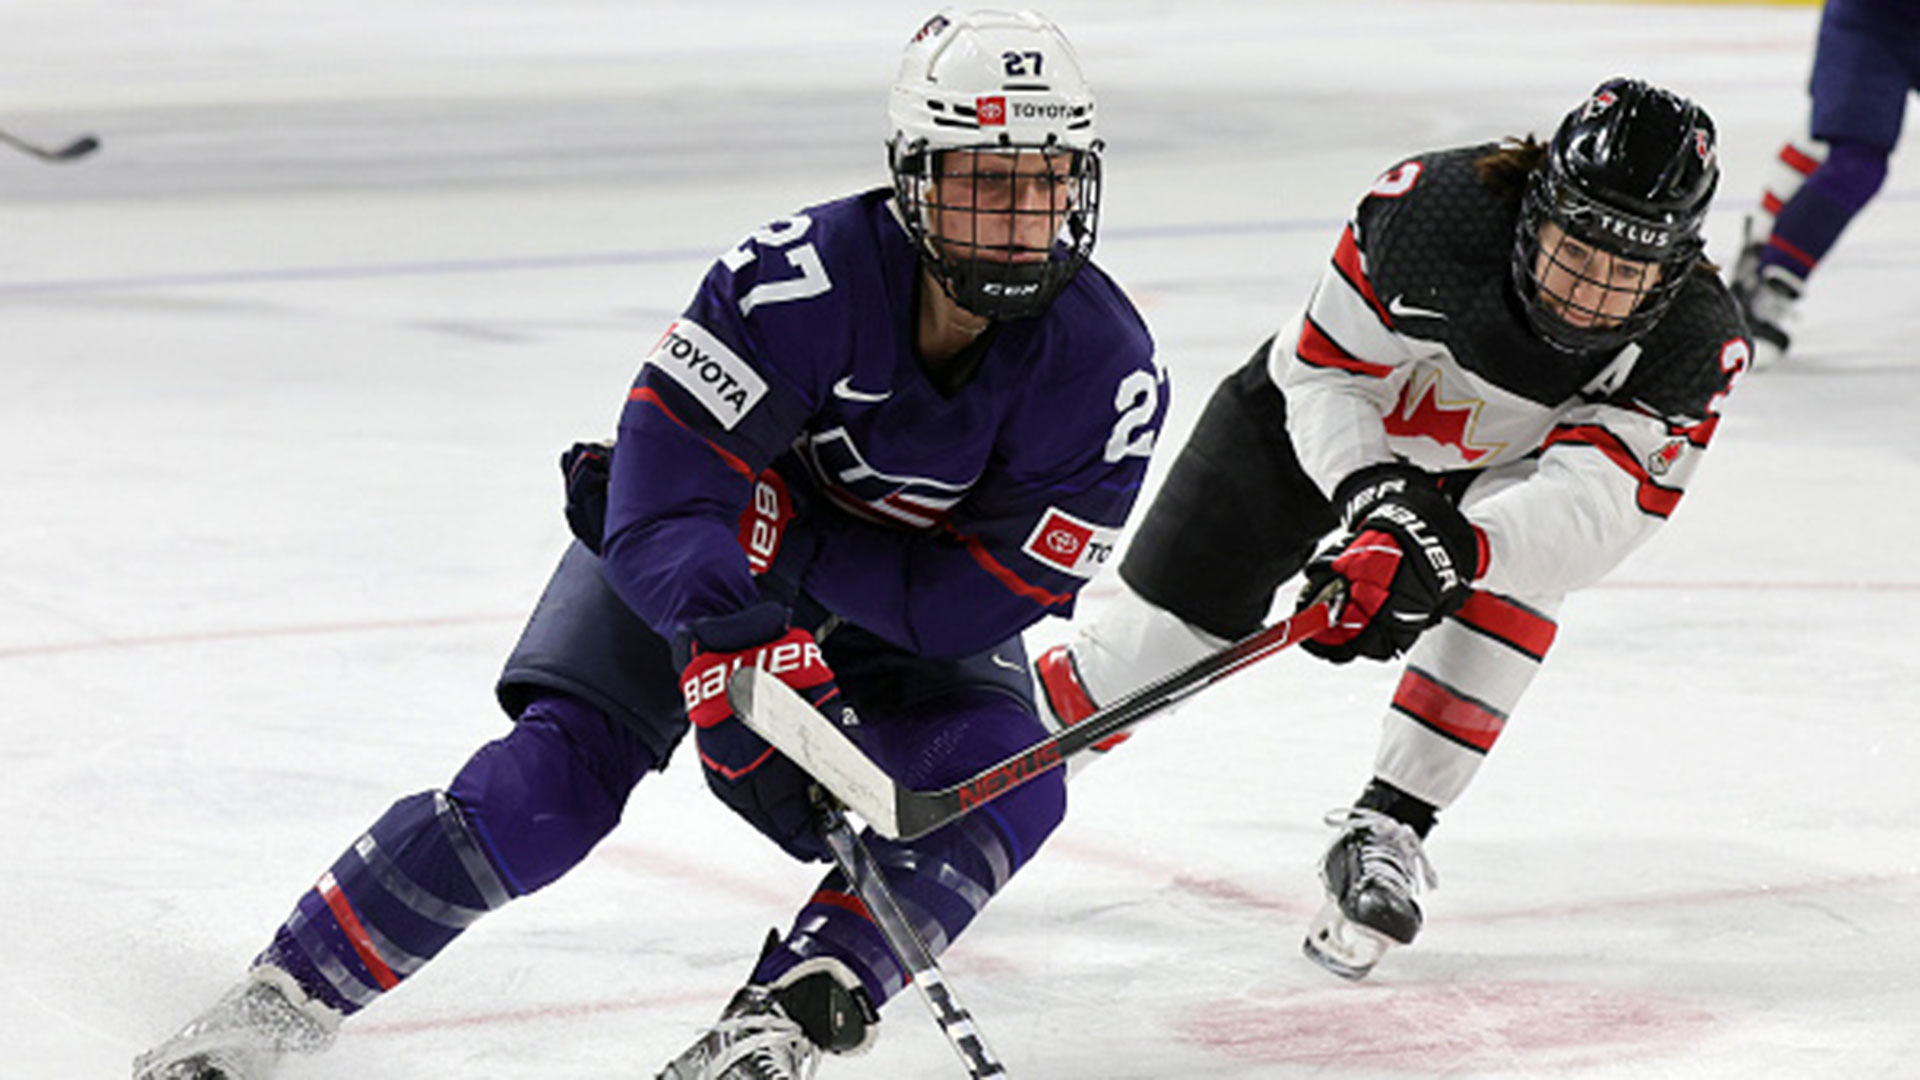 PWHL holds its inaugural draft in Toronto with Heise headlining the